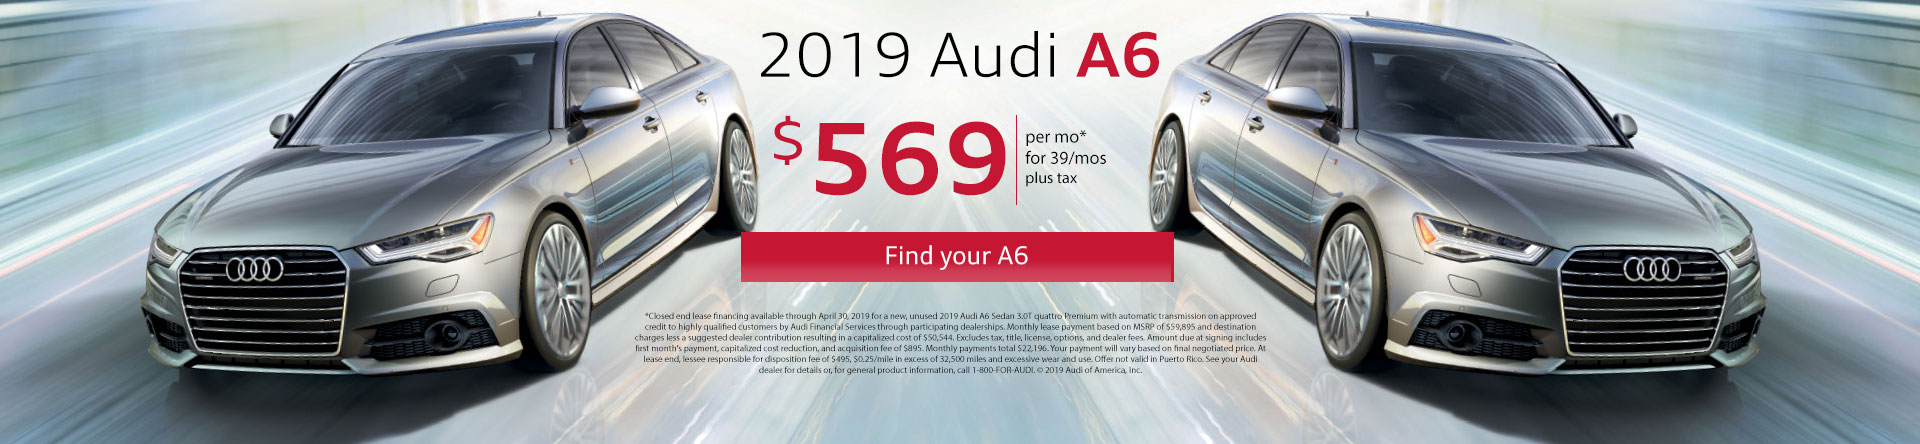 Audi Allroad Lease Offers